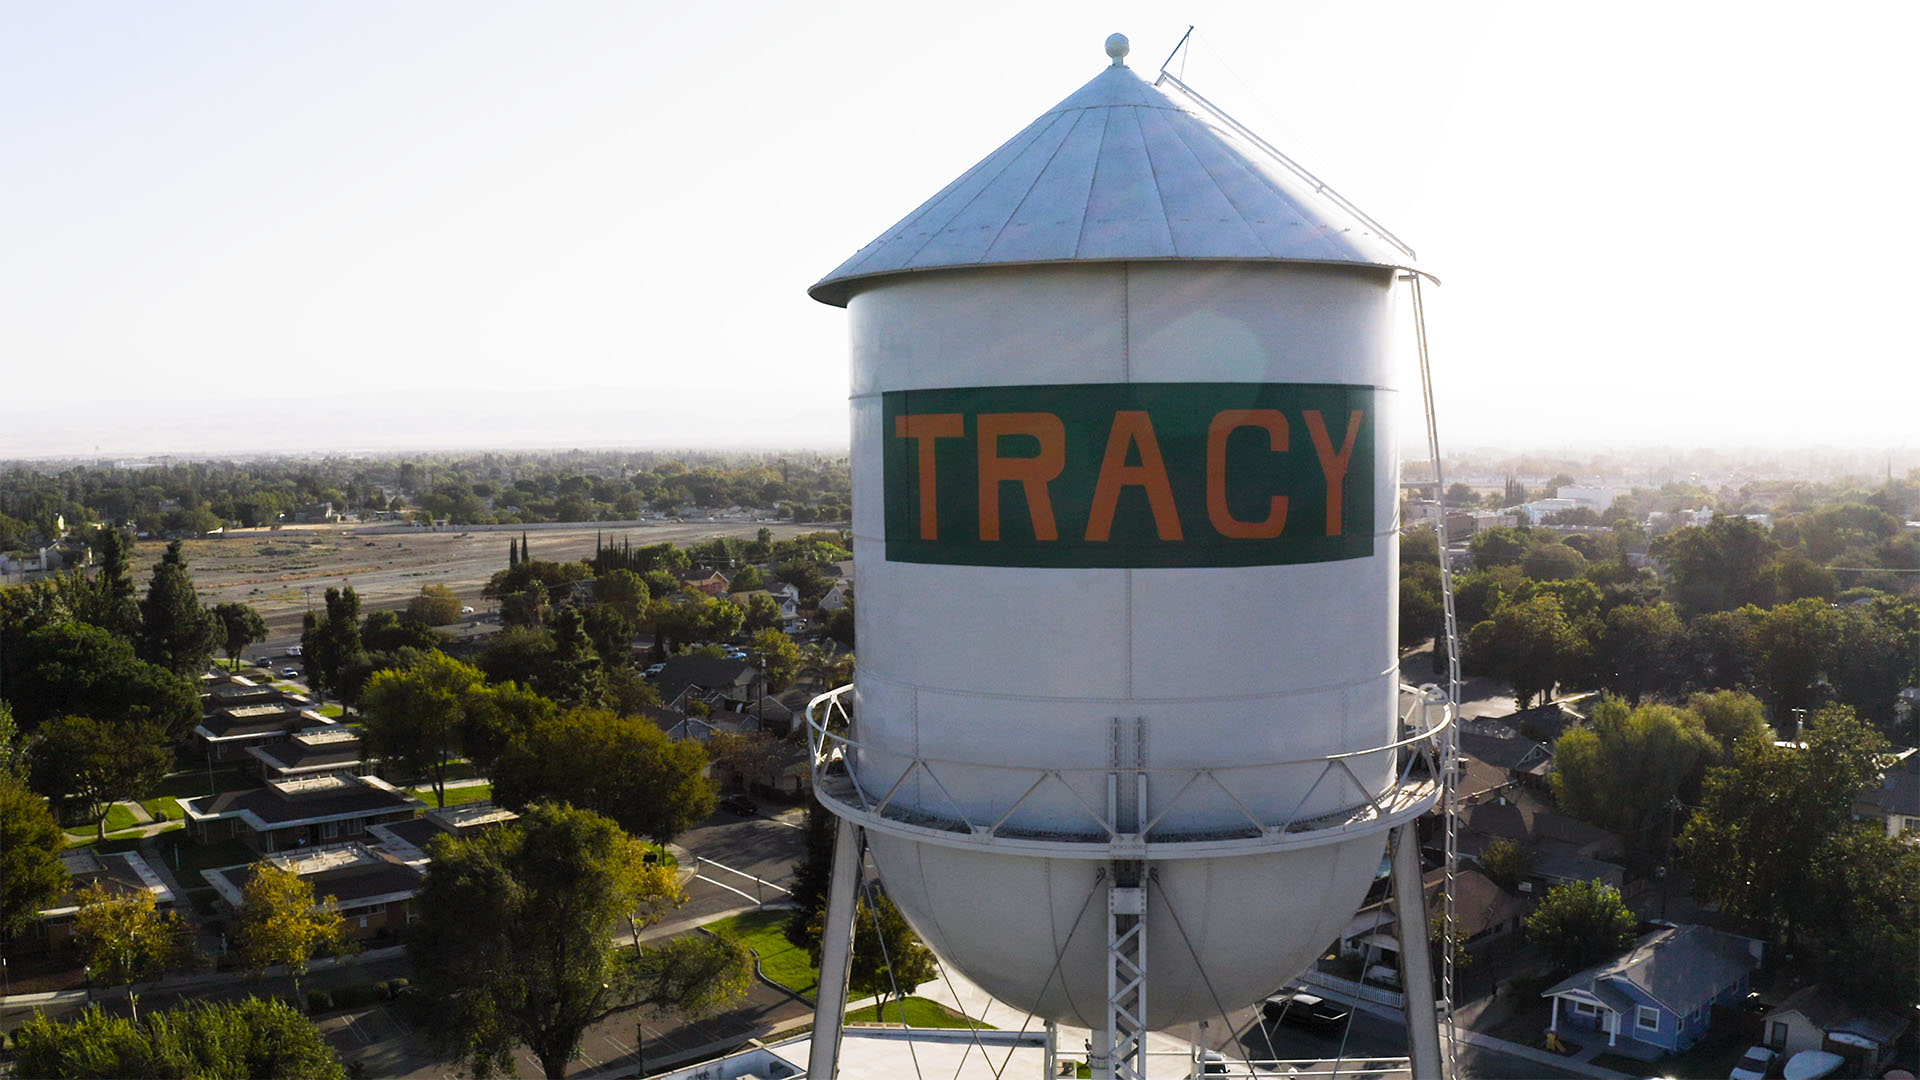 5 Fun Facts About Tracy